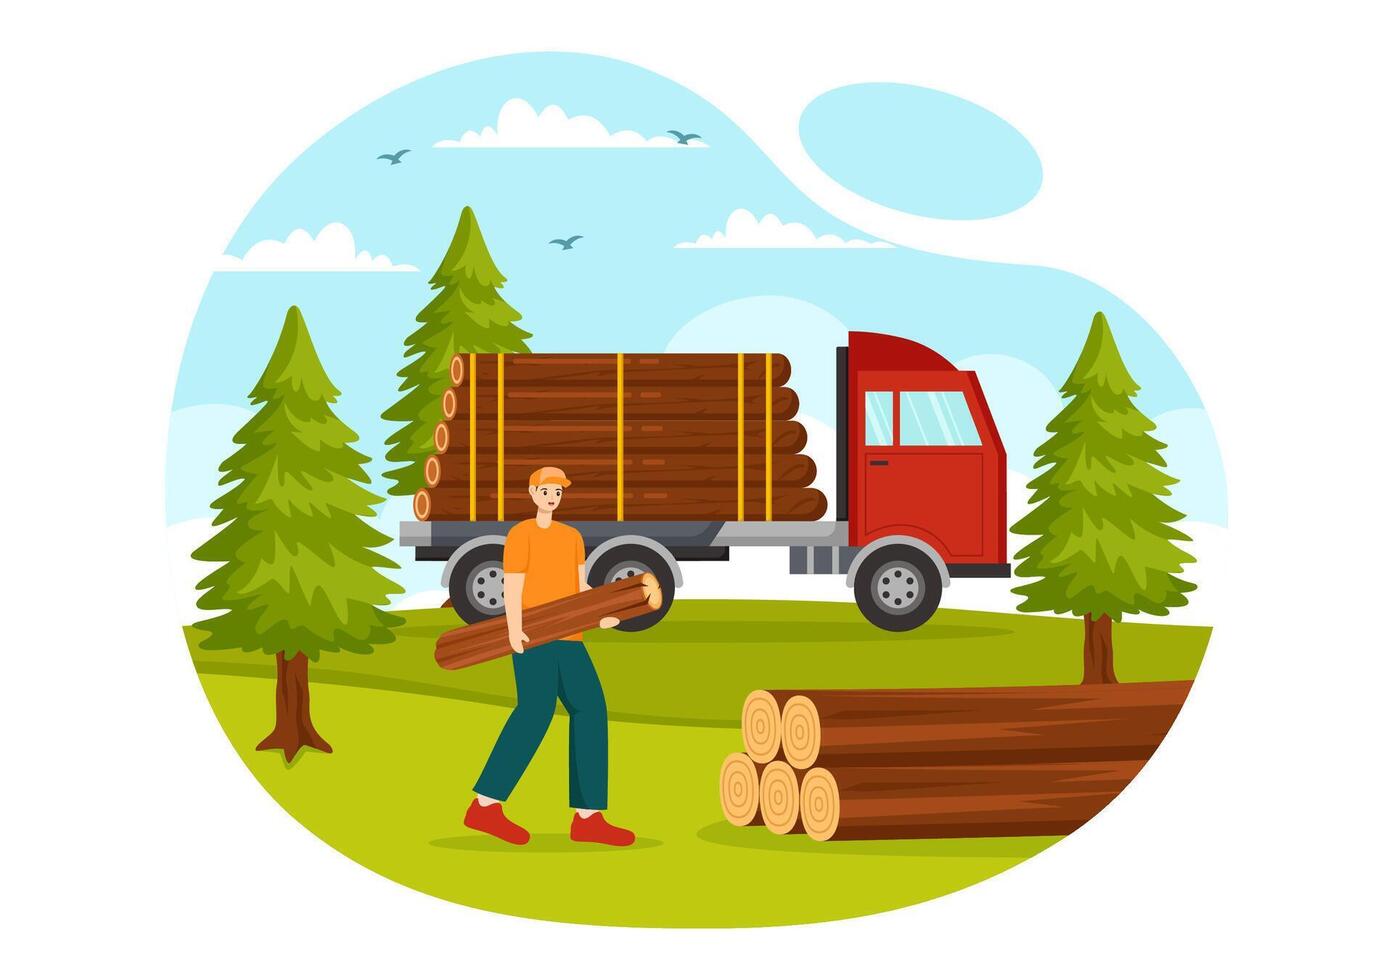 Timber Vector Illustration with Man Chopping Wood and Tree with Lumberjack Work Equipment Machinery or Chainsaw at Forest in Flat Cartoon Background